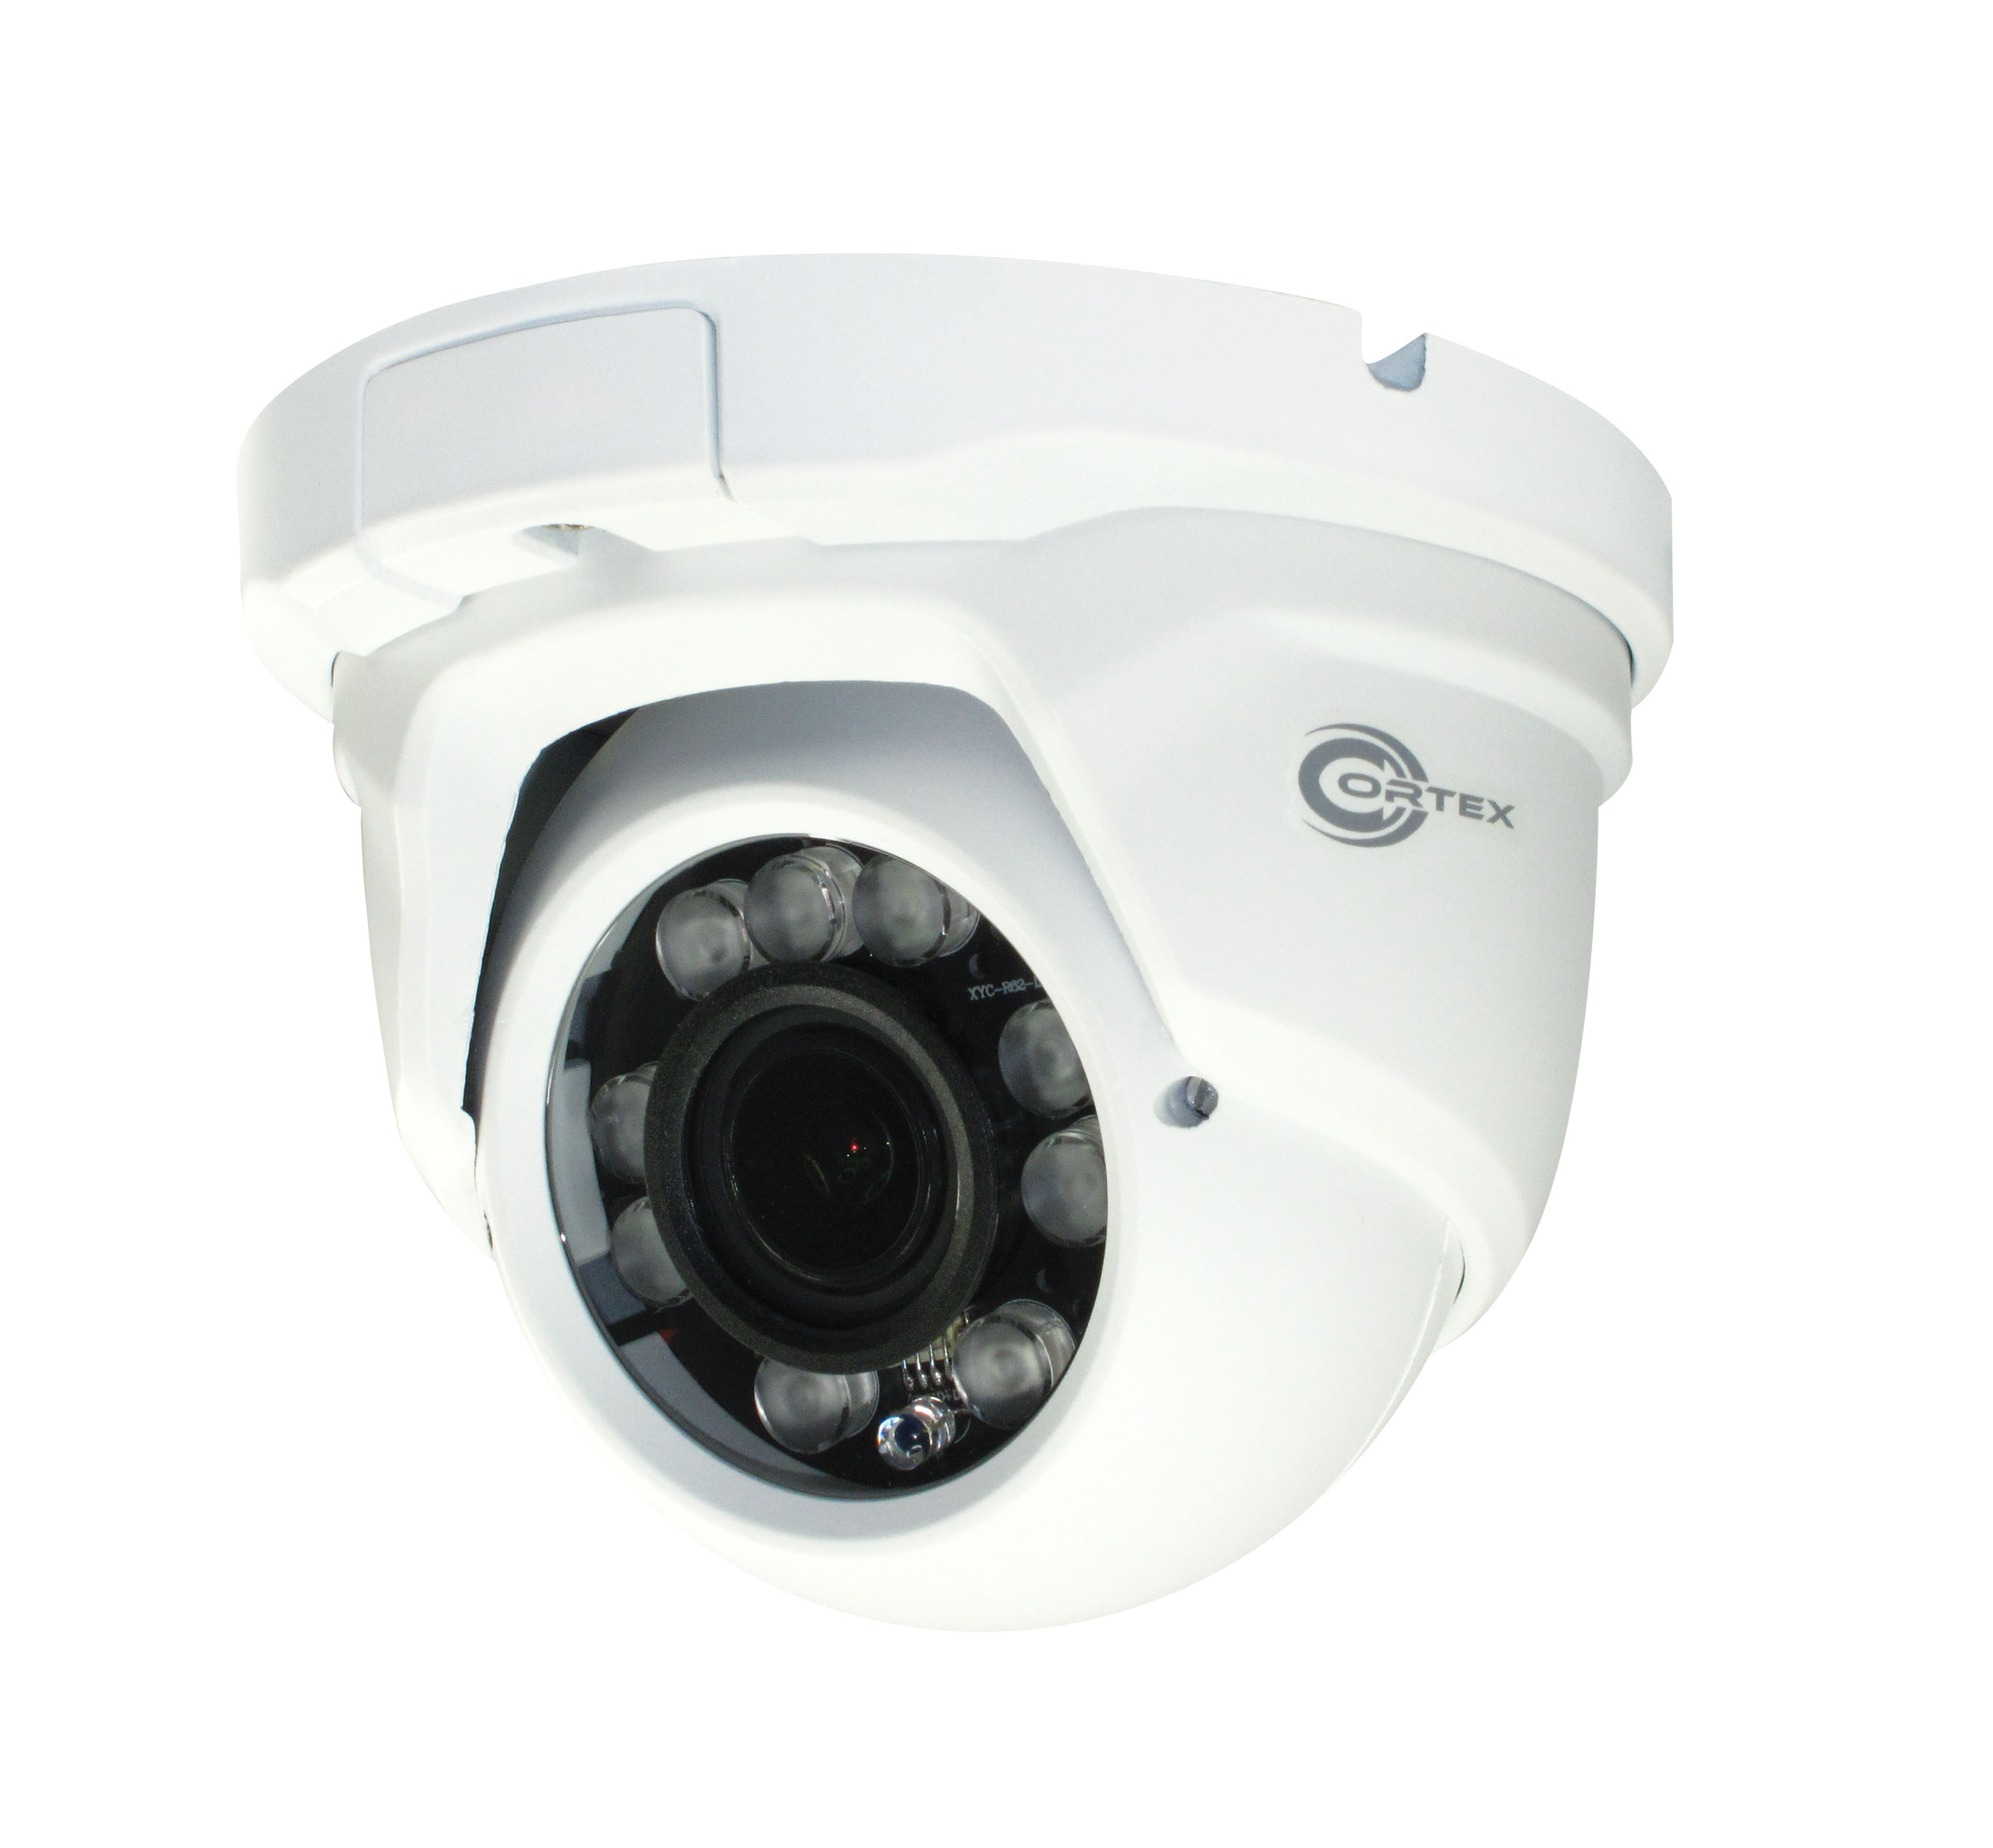 COR-H588  This premium quality outdoor dome camera provides users with 5MP AHD, TVI or 2MP CVI plus legacy analog output